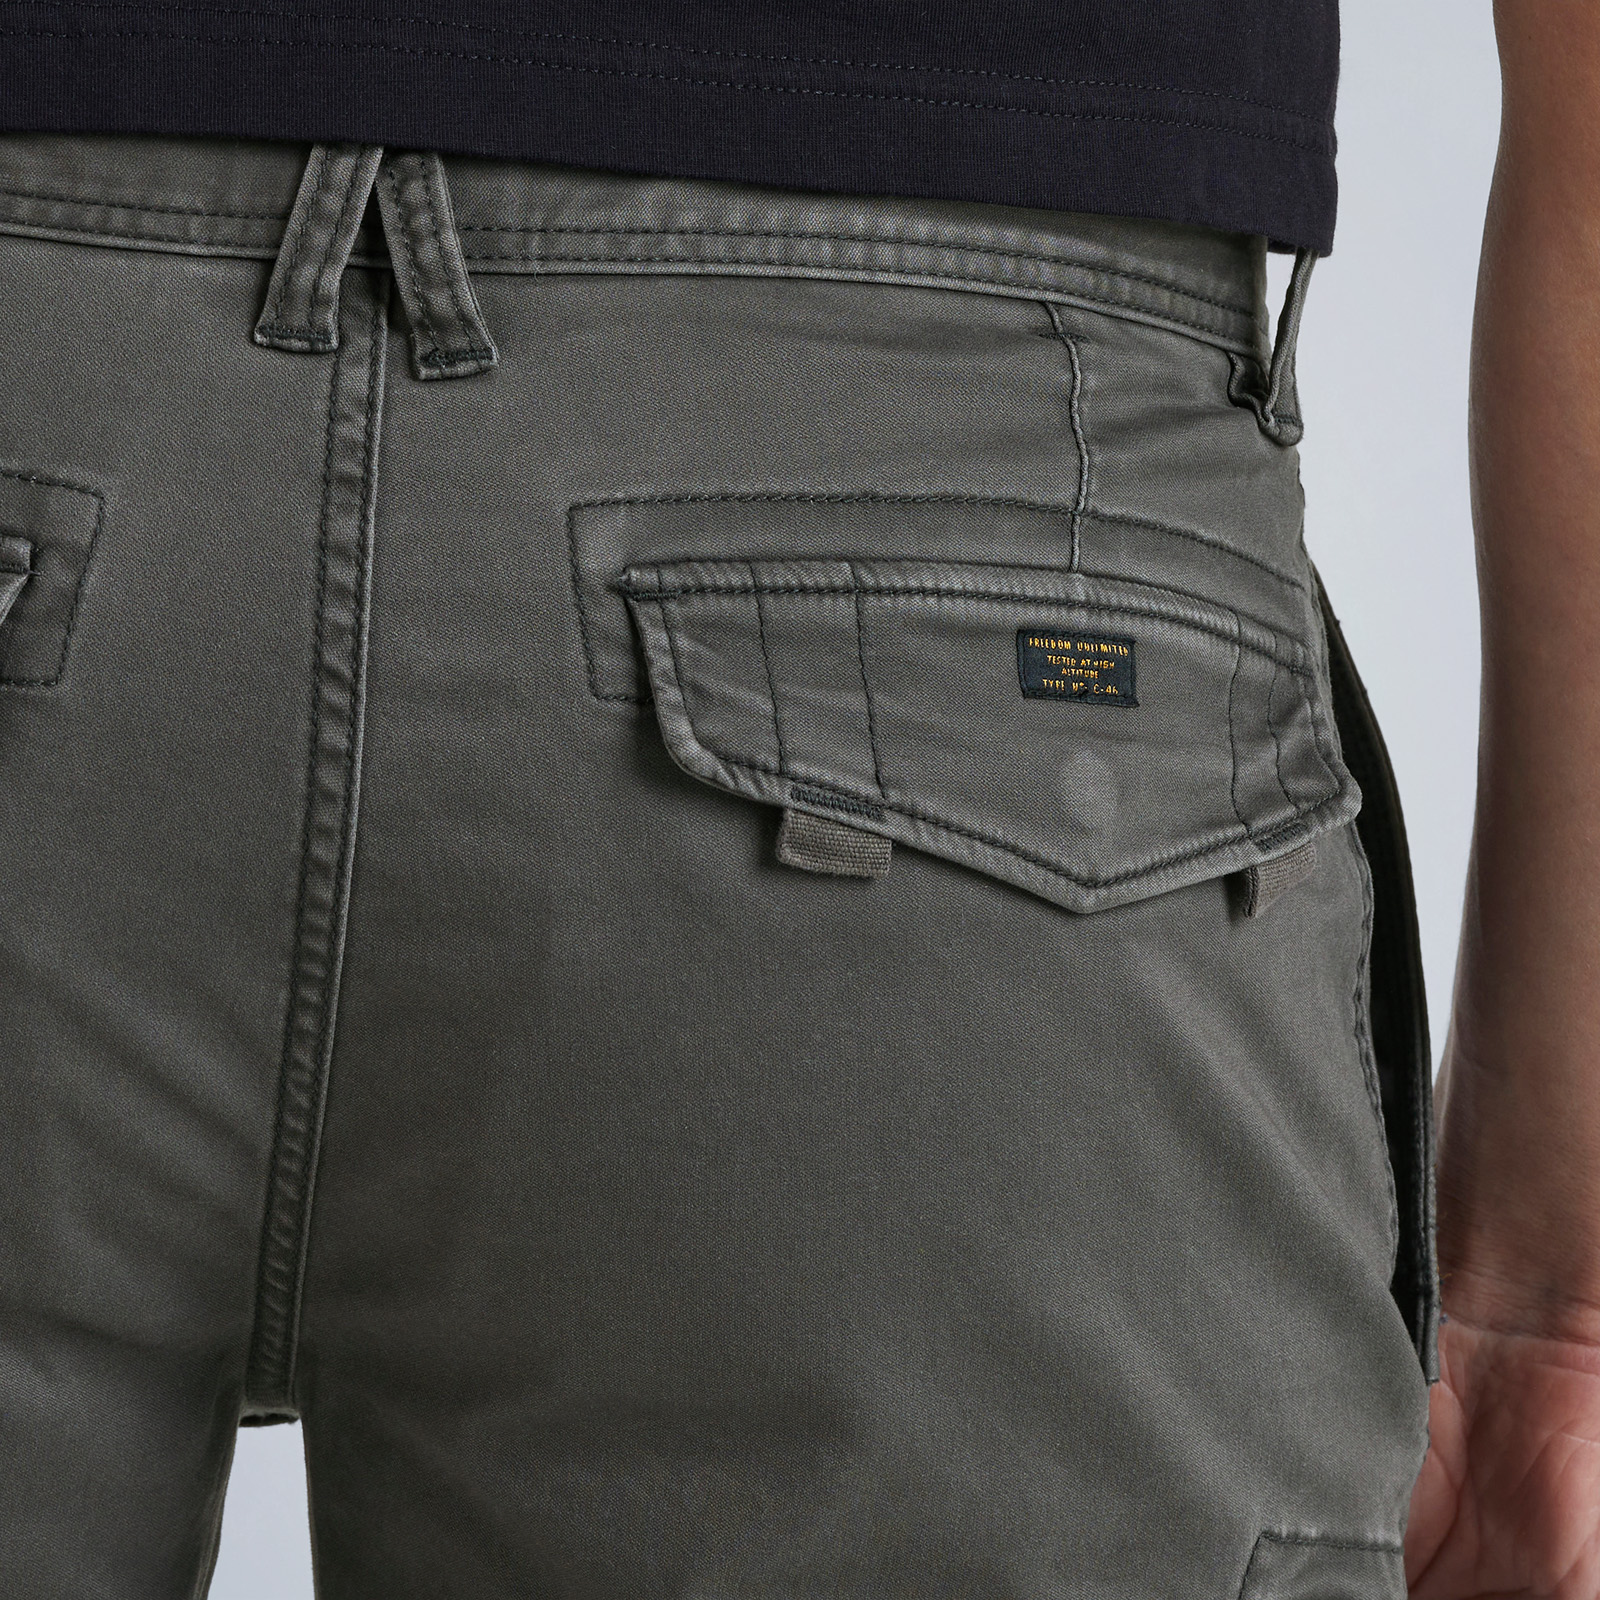 PME LEGEND | returns Twill Stretch shipping Free | Short Cargo and